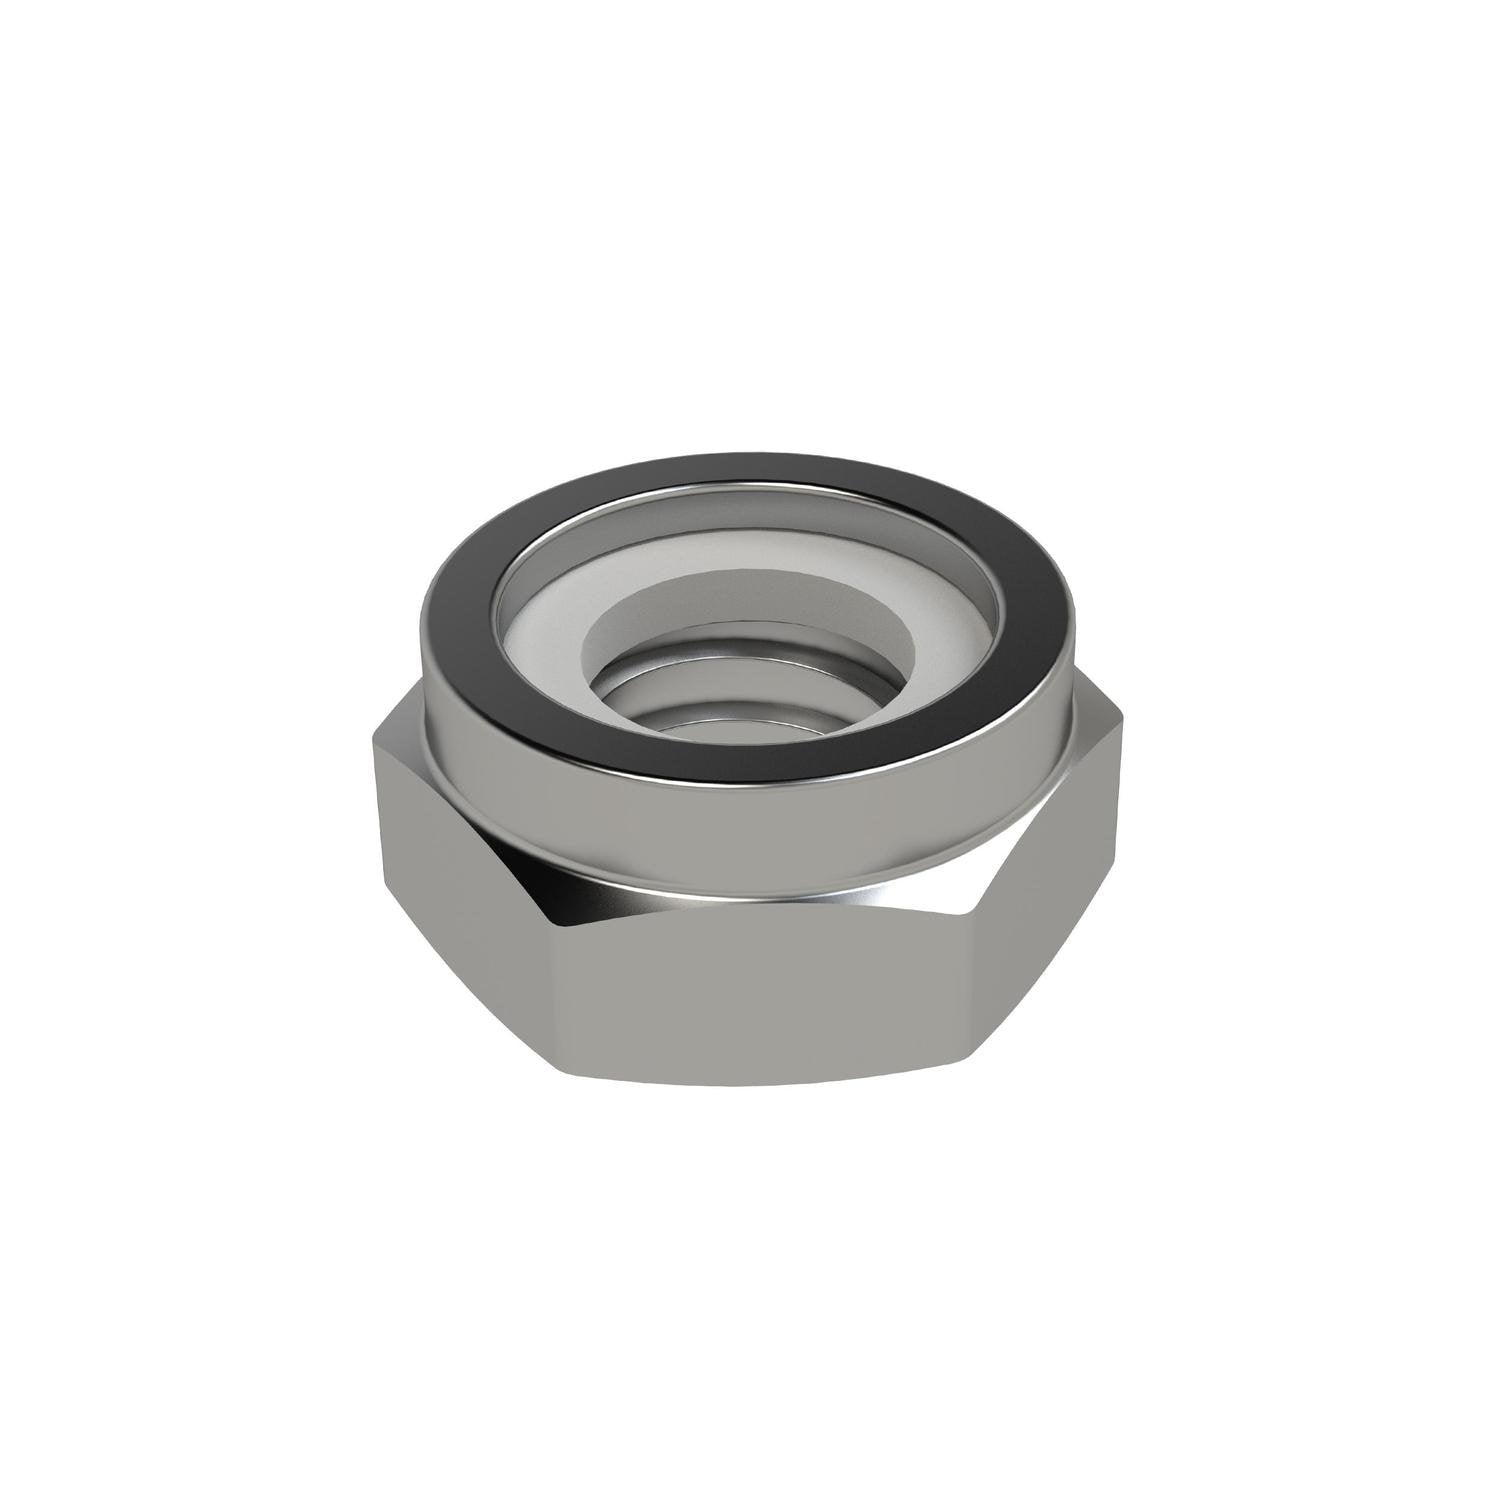 Bremick Nyloc Nuts M10 Zinc Plated